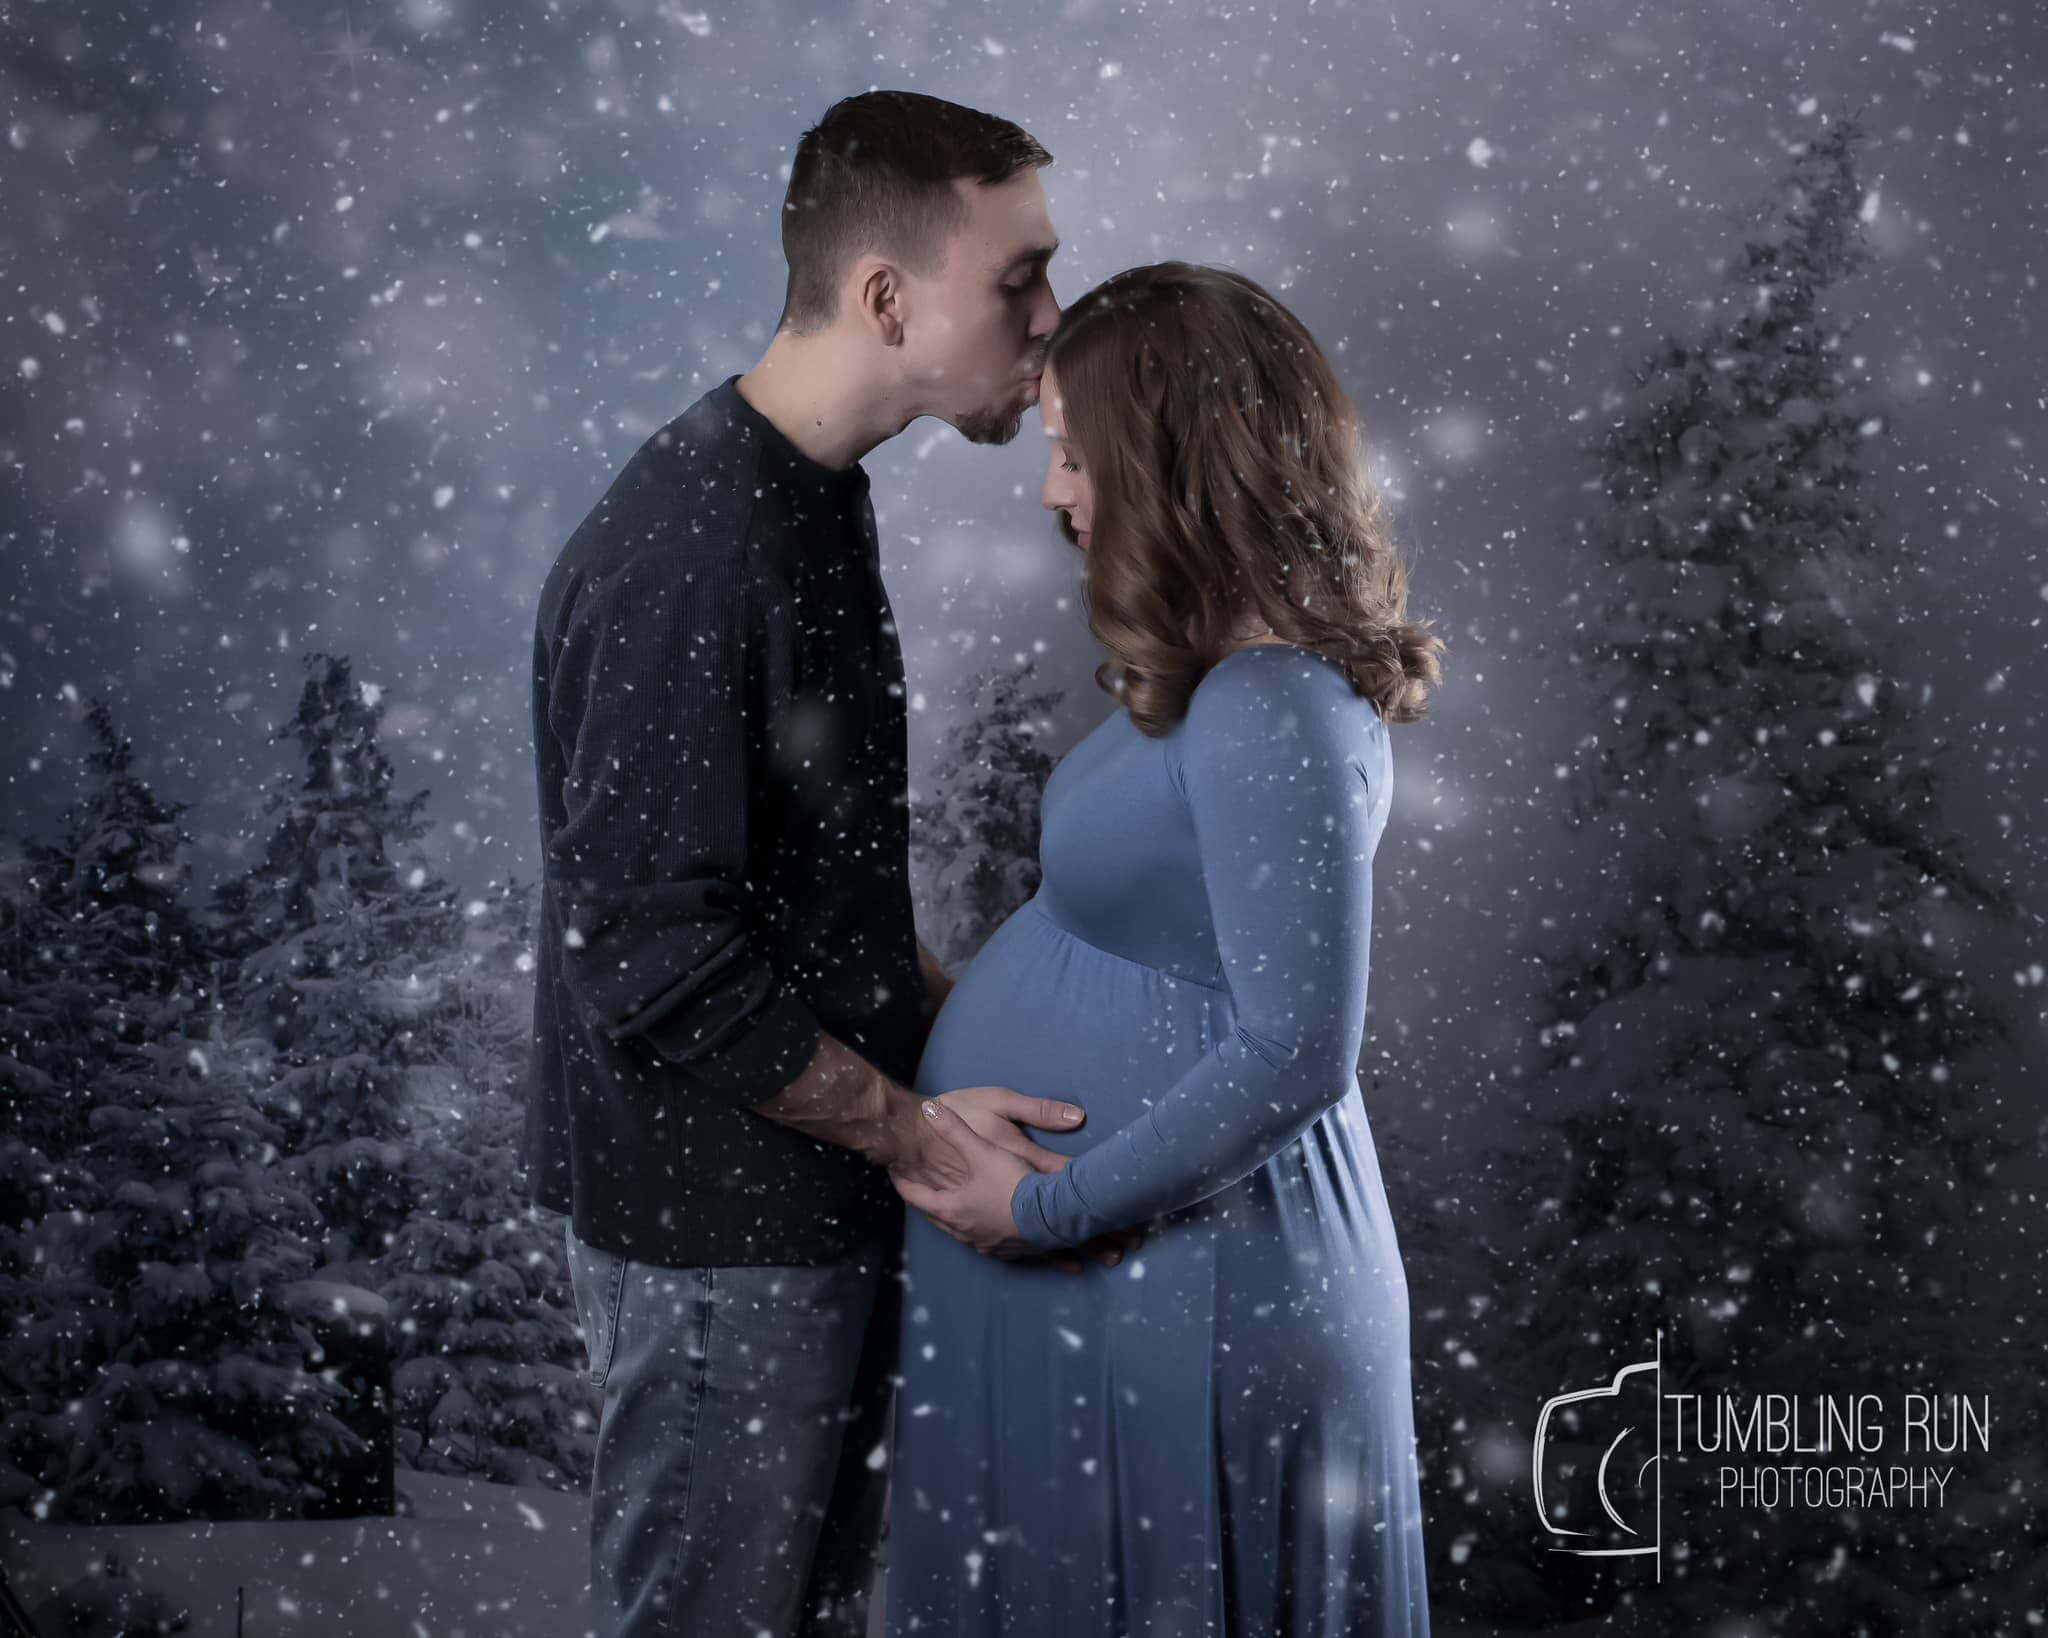 Kate Christmas Winter Wonderland With Trees Backdrop for Photography